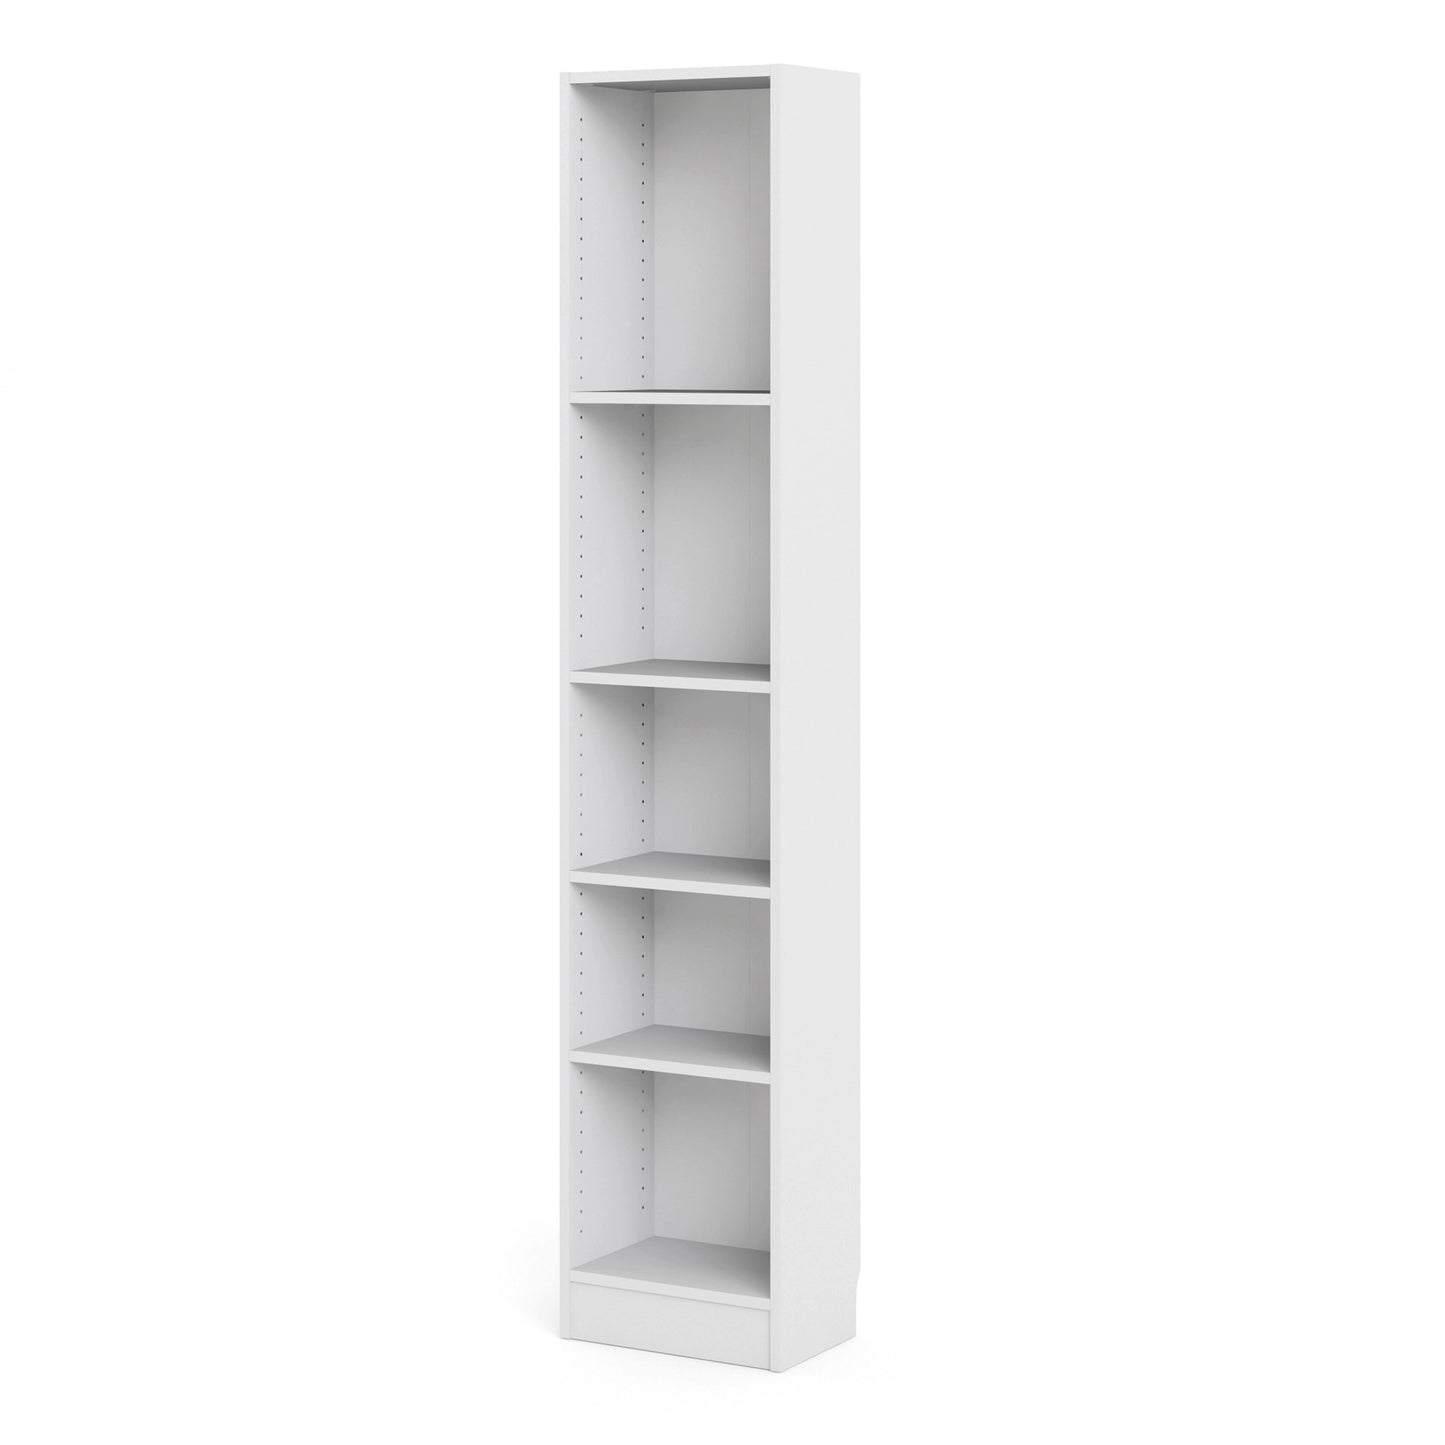 Furniture To Go Basic Tall Narrow Bookcase (4 Shelves) in White